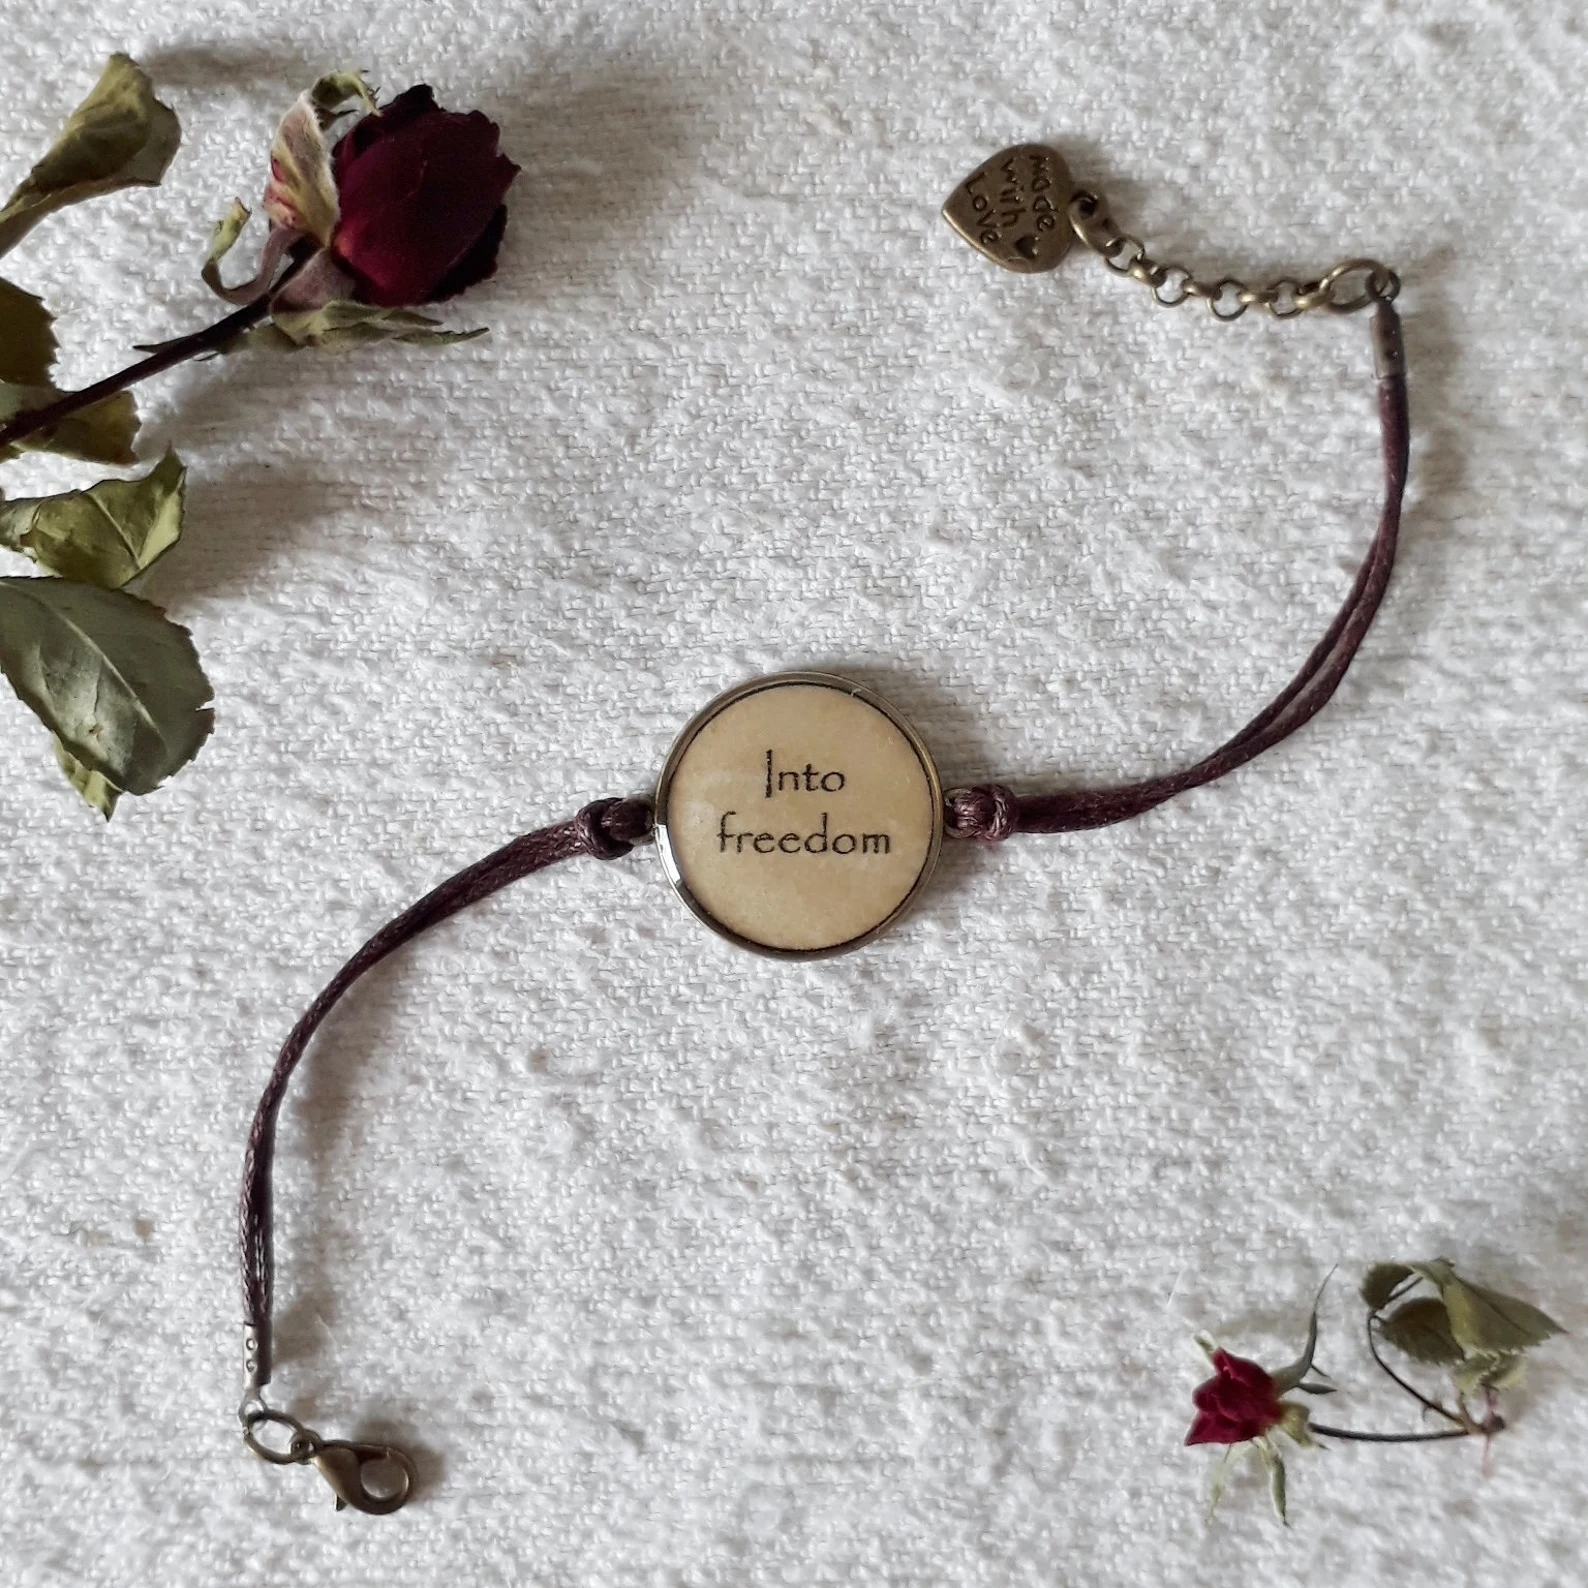 A bracelet with a pendant that reads "into freedom"